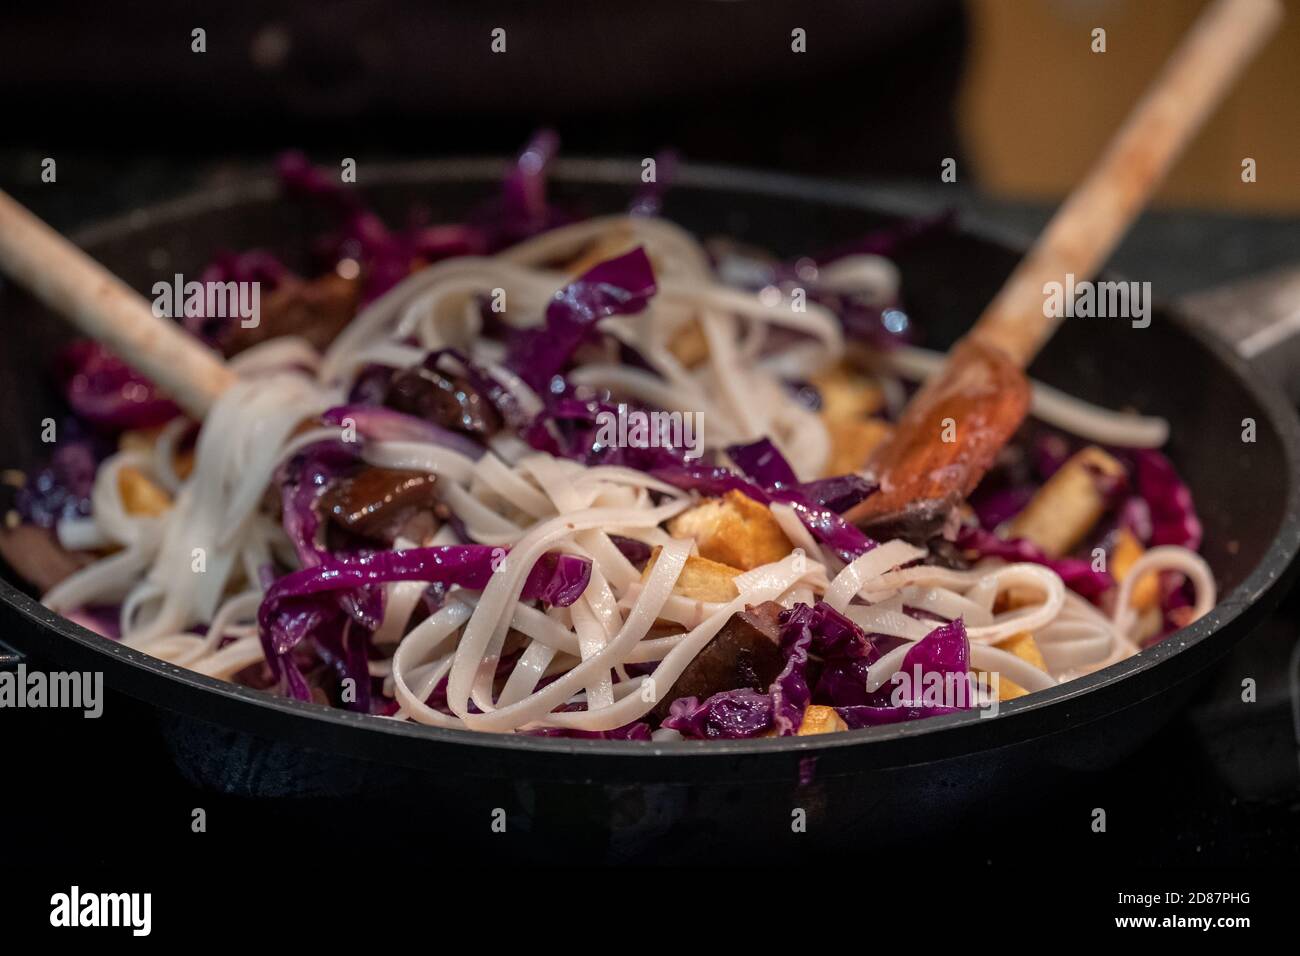 Preparing a vegan Asian Pad Thai stir fry with red cabbage, tofu, aubergine and noodles. Stock Photo